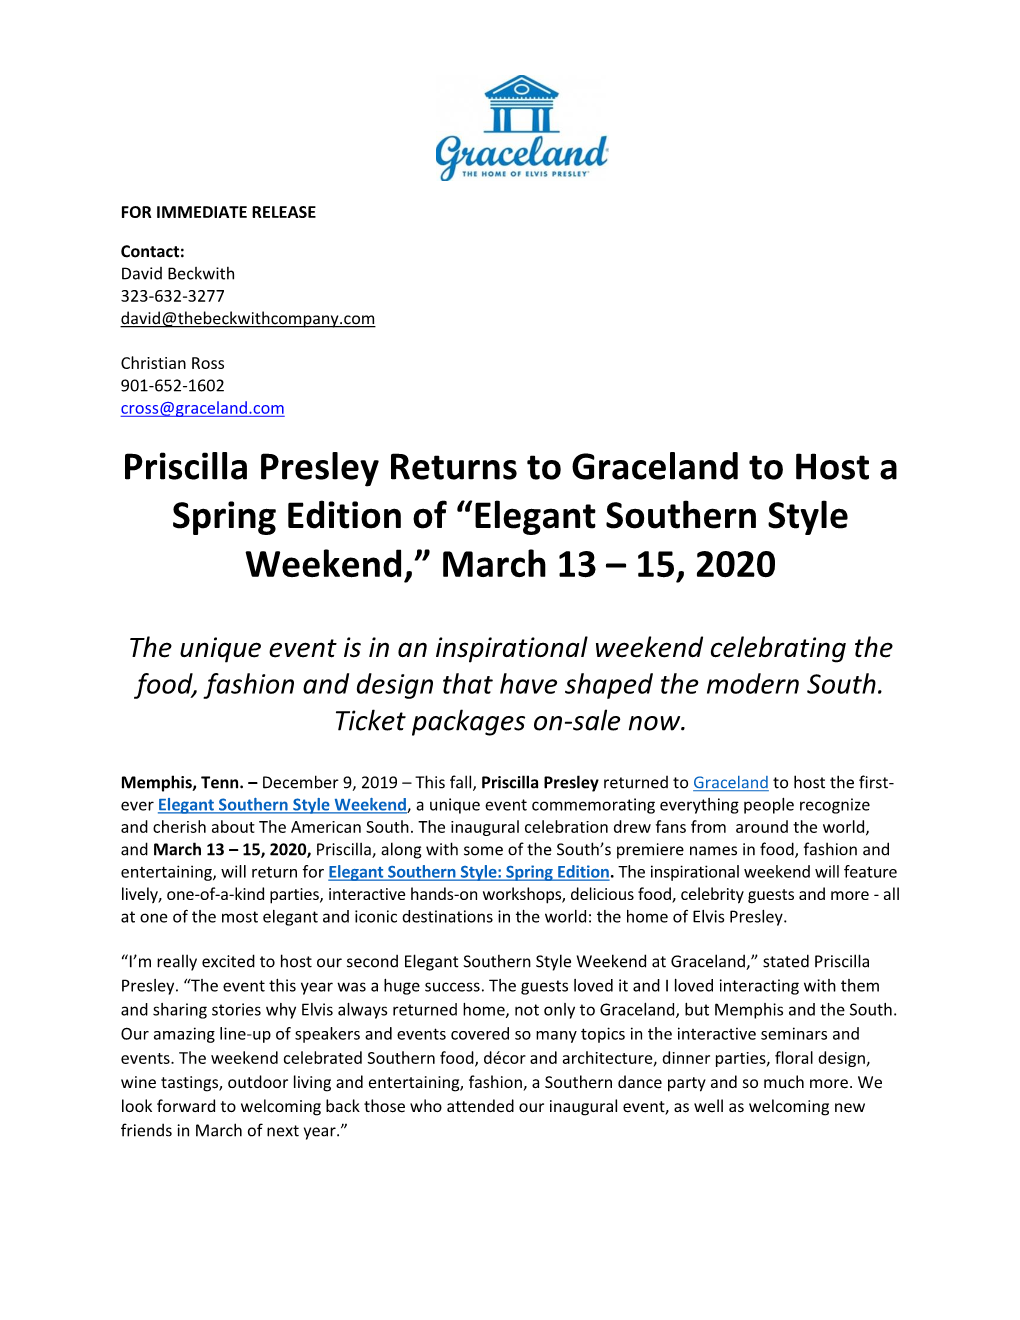 Priscilla Presley Returns to Graceland to Host a Spring Edition of “Elegant Southern Style Weekend,” March 13 – 15, 2020